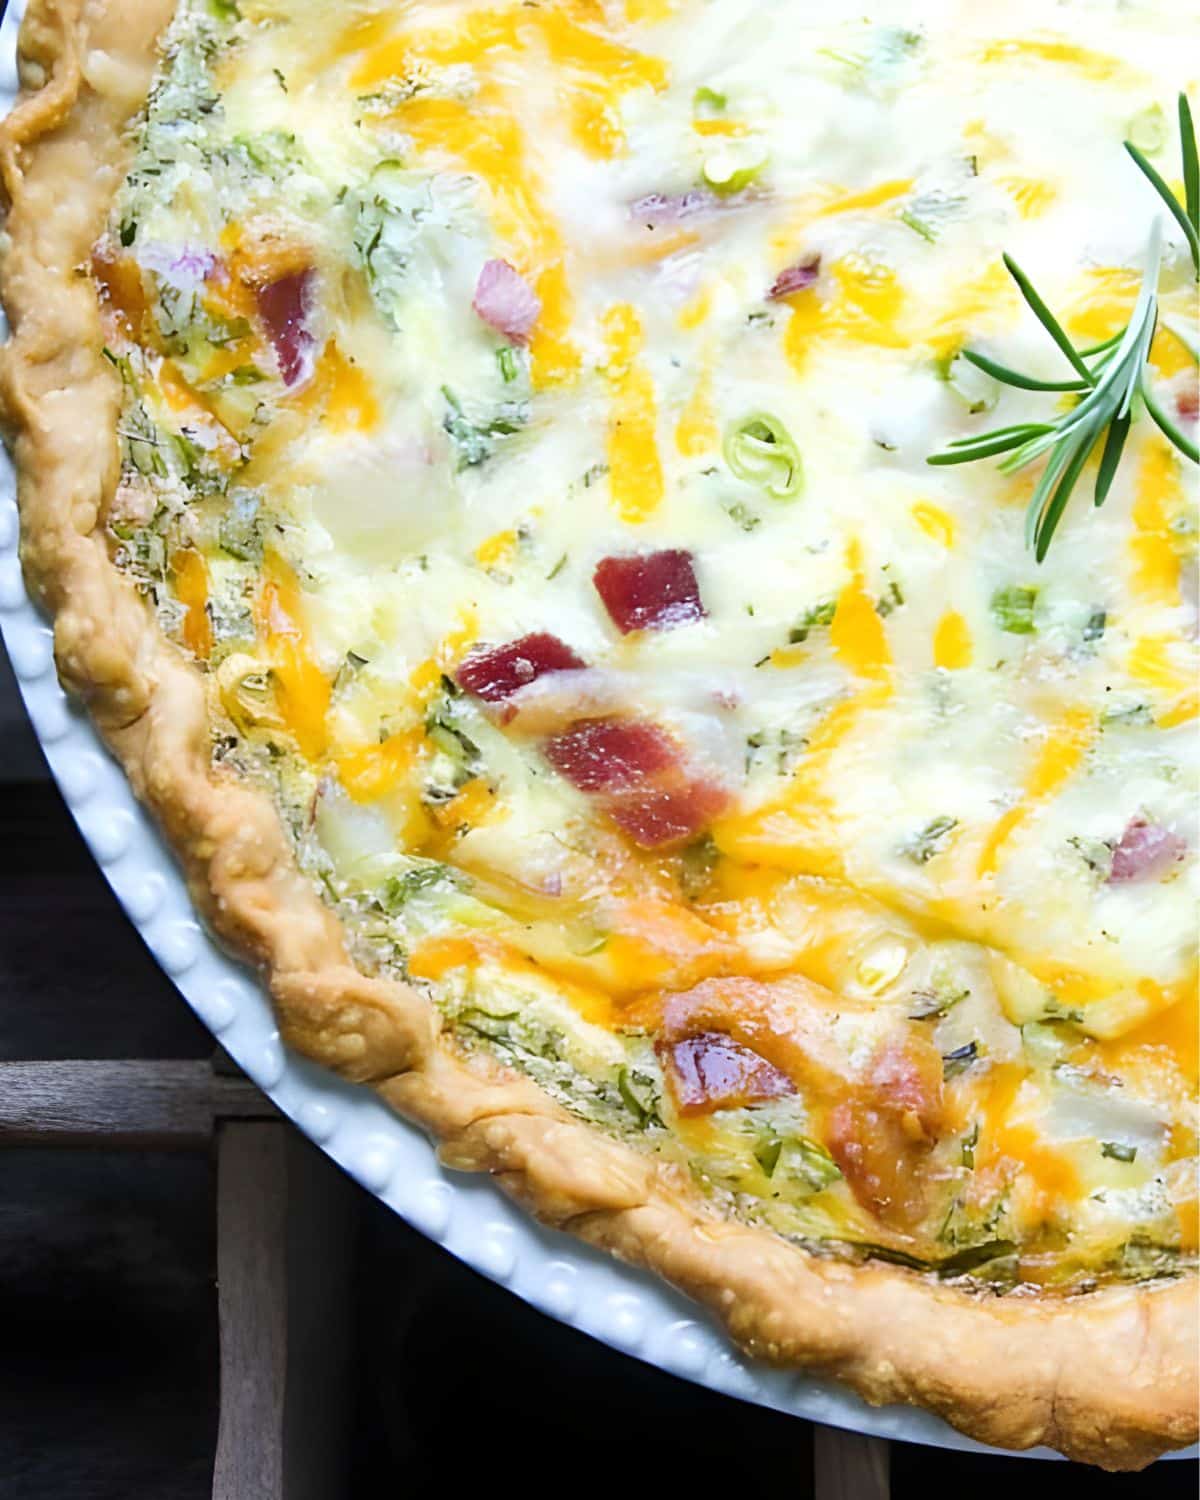 A loaded baked potato quiche with bacon and cheese.